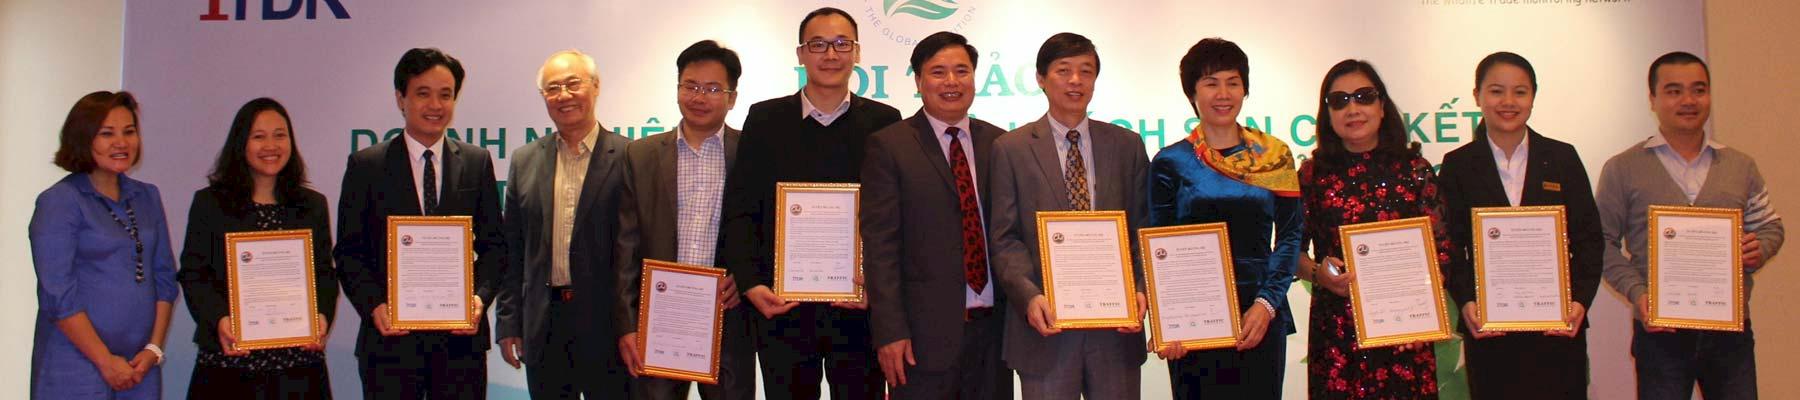 Hanoi: nine businesses today signed pledges to adopt wildlife protection into their CSR policies © TRAFFIC